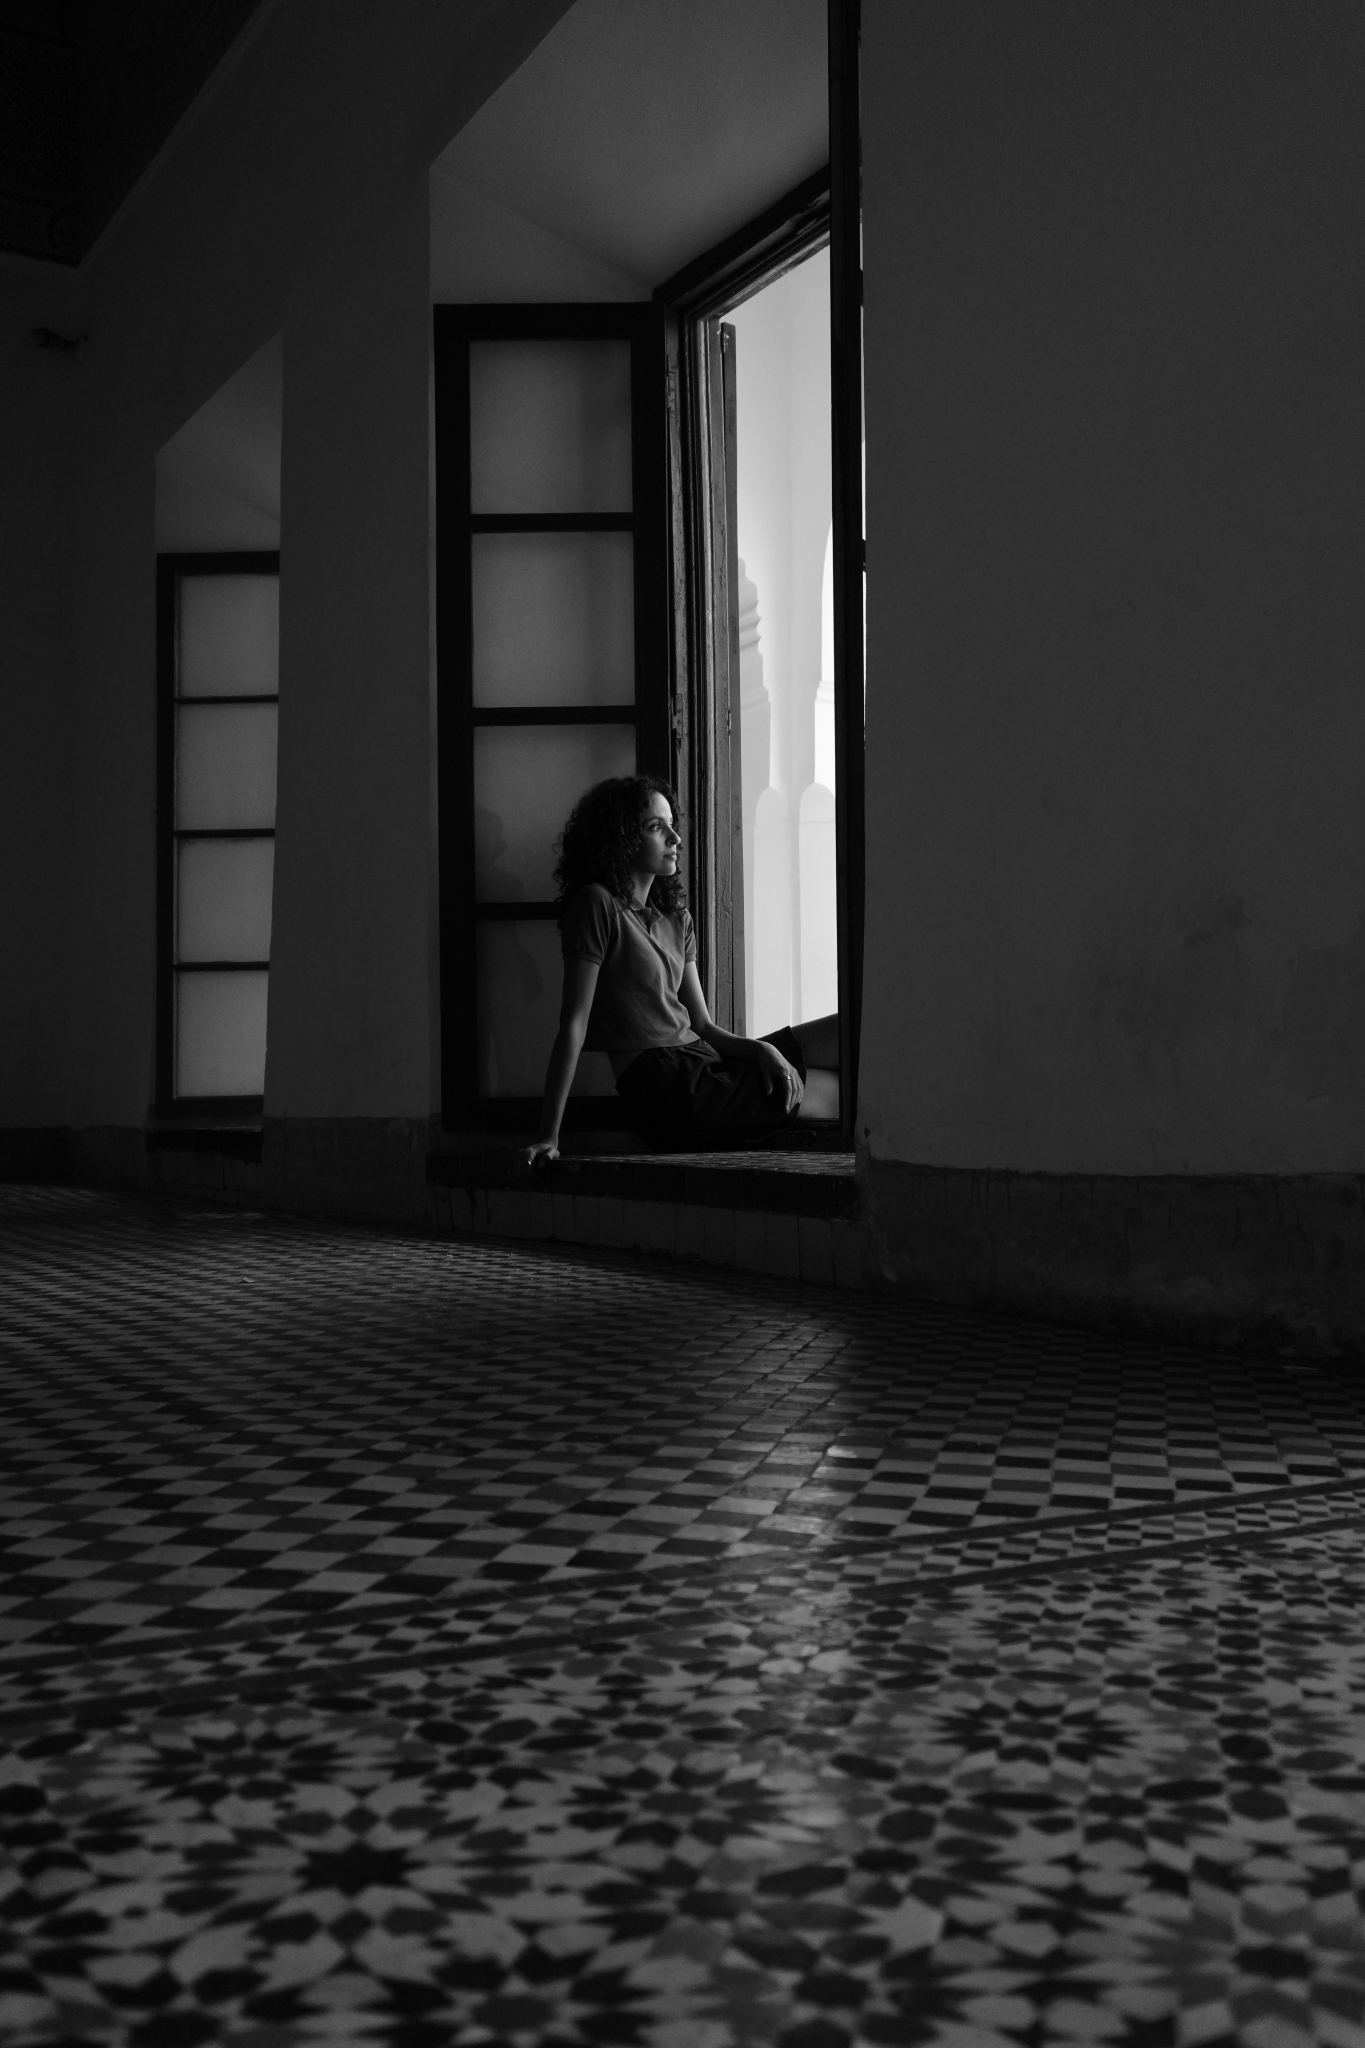 Sample image of a woman sitting by the window Creative Look: Black & White